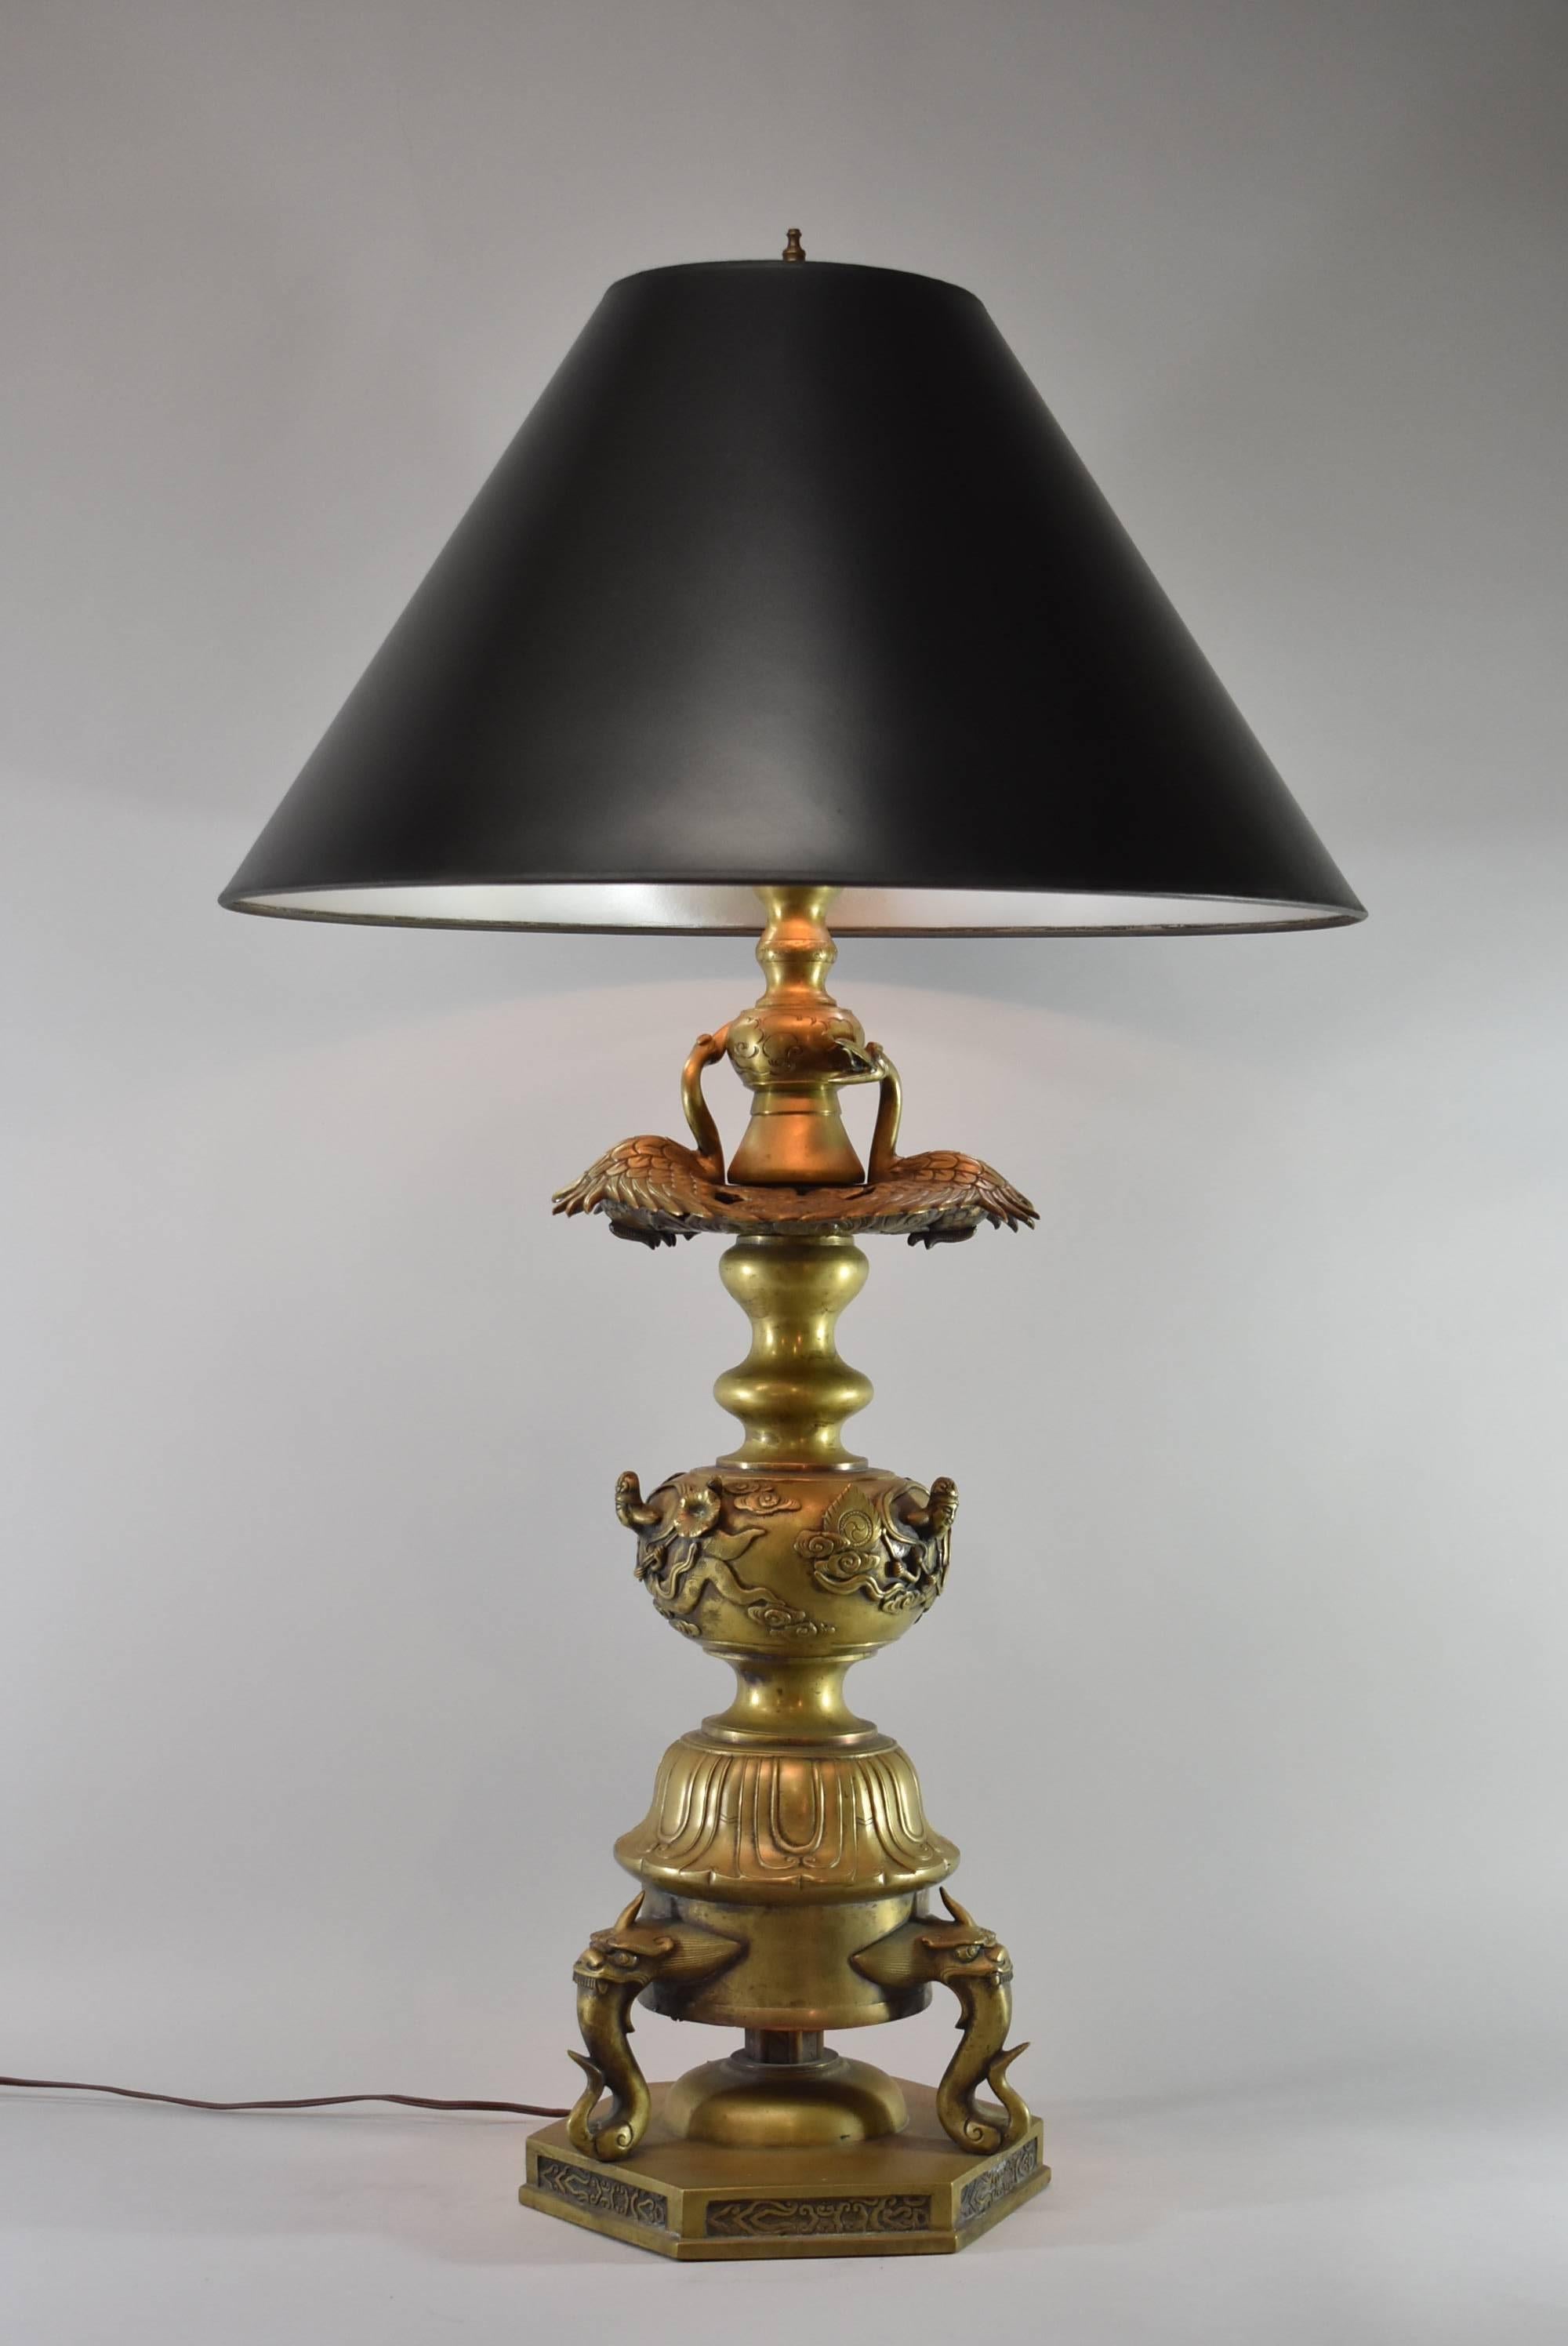 A stunning Asian style brass lamp. This large-scale lamp features cranes, dragons and female figures. Sure to make a statement in any room. The dimensions are 42